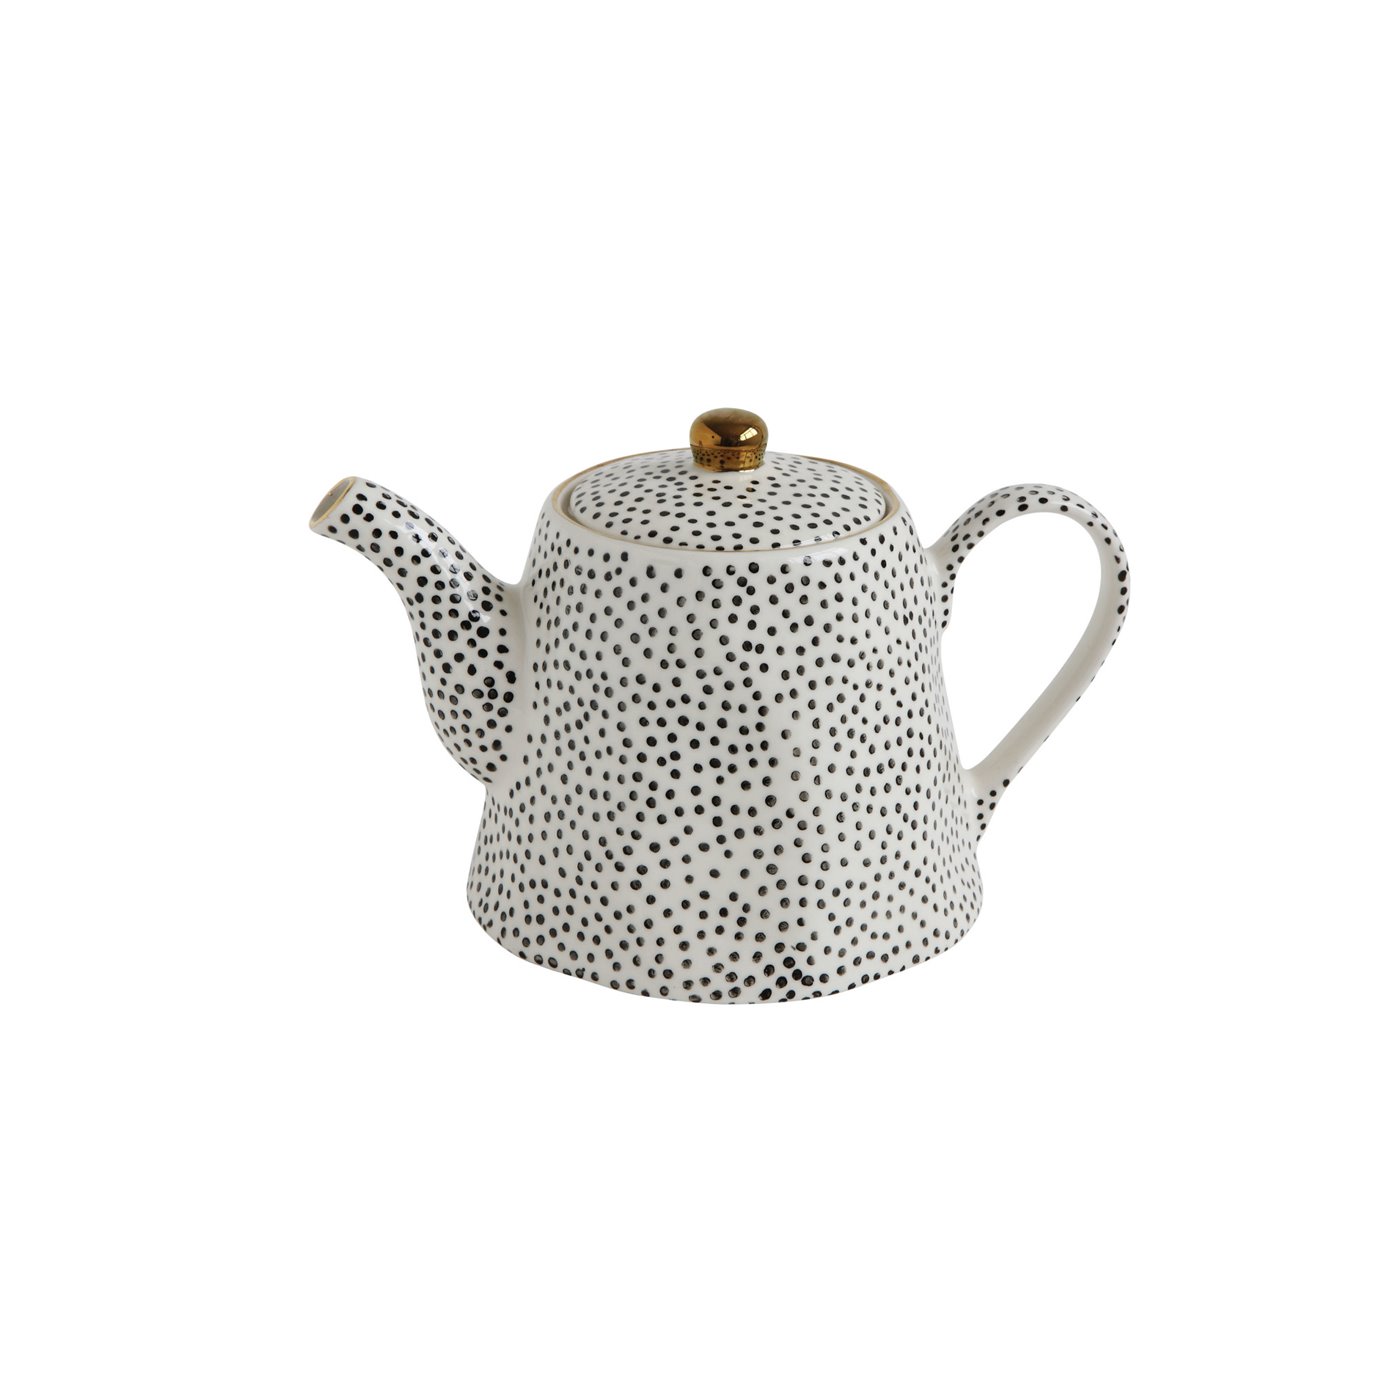 White Stoneware Teapot with Black Speckles & Gold Electroplating